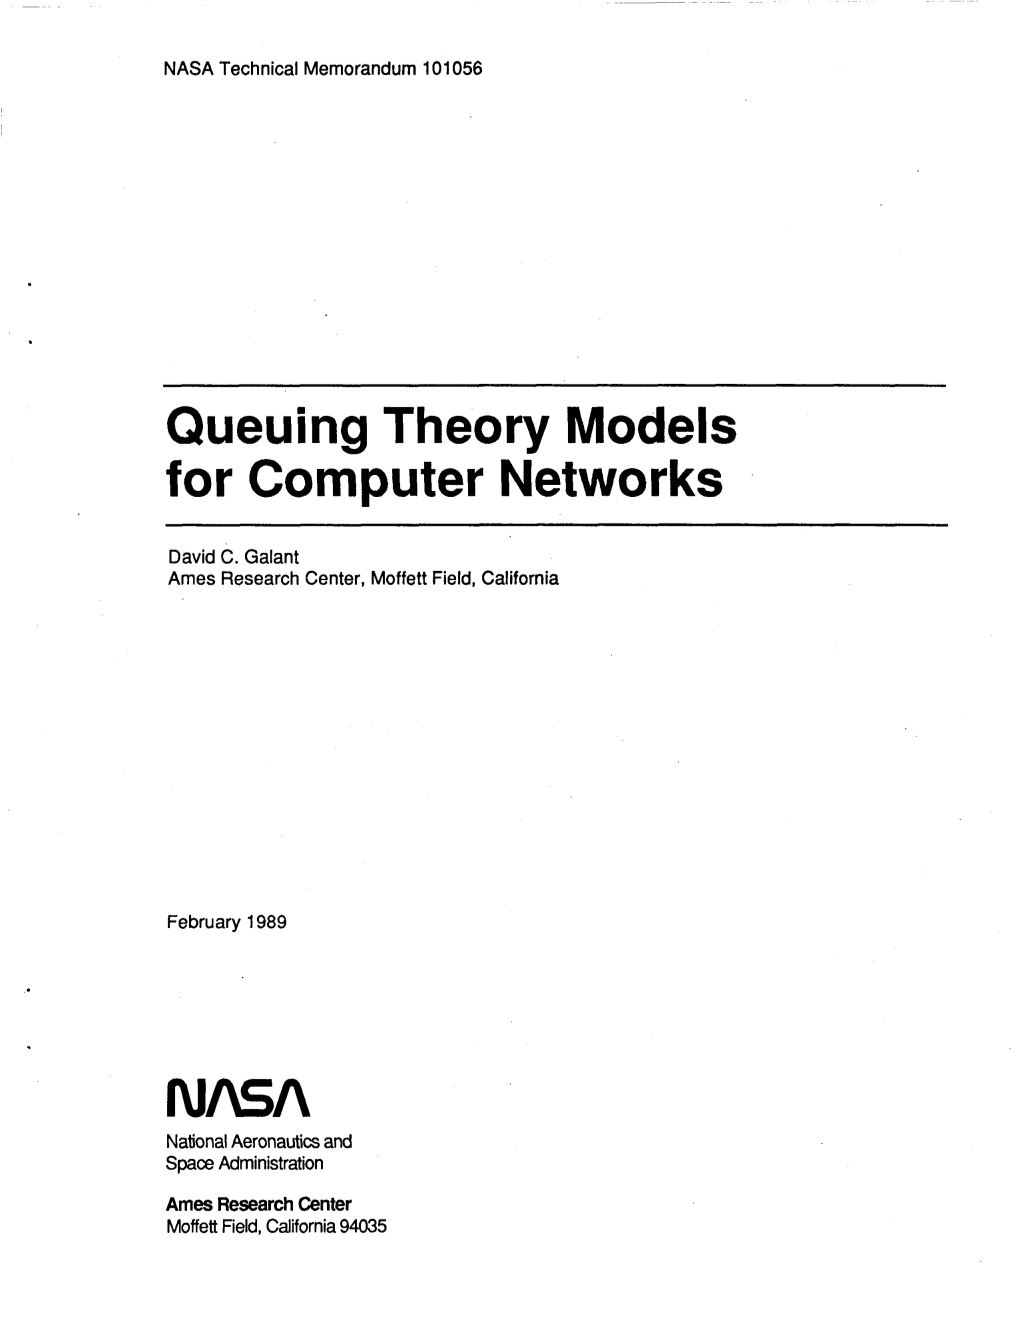 Queuing Theory Models for Computer Networks